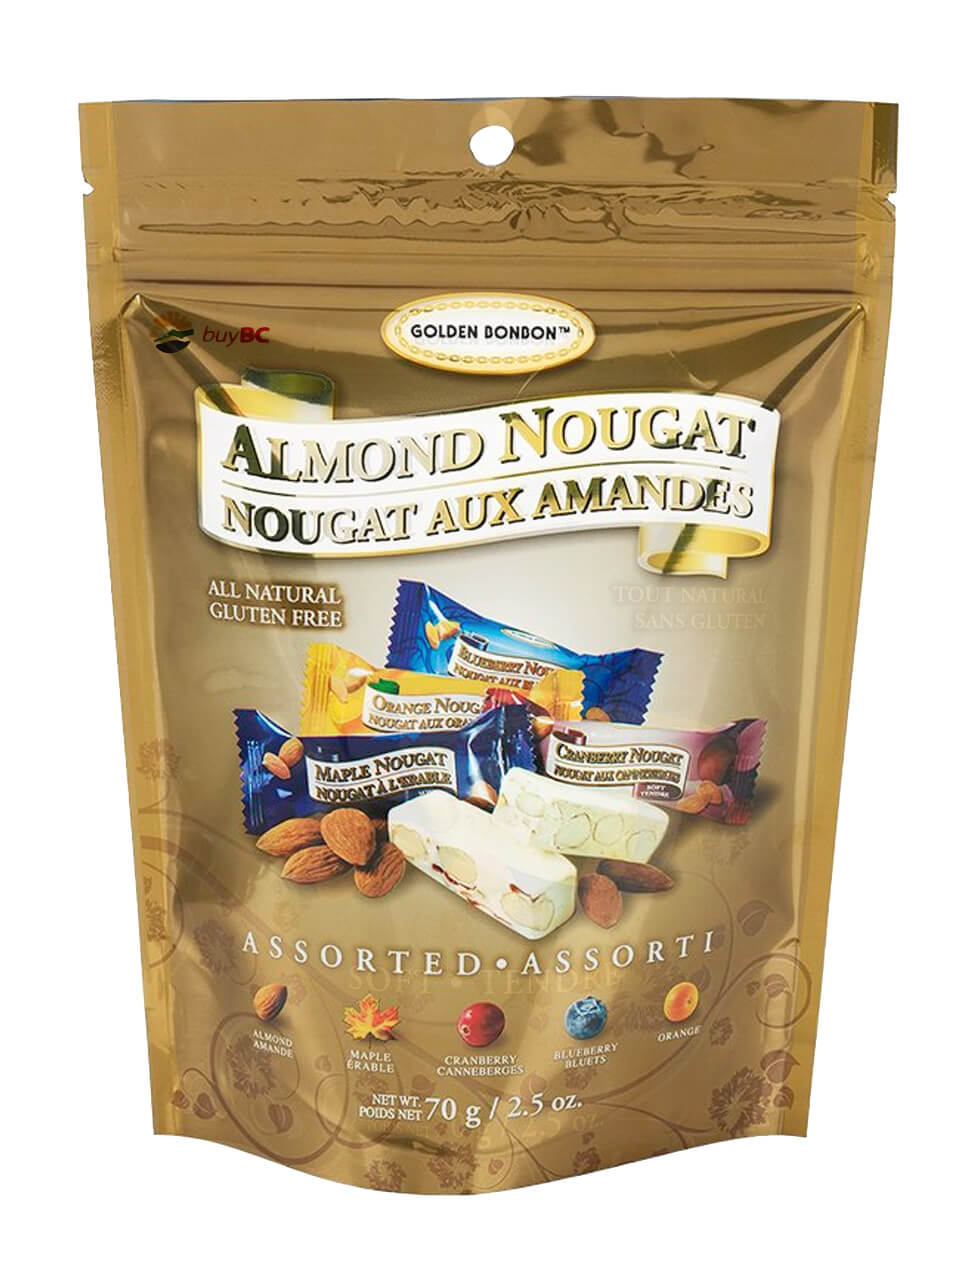 Gold foil bag reading "Golden Bonbon. Almond Nougat". Picture on front has almond nougats in and outside of individual wrappers.